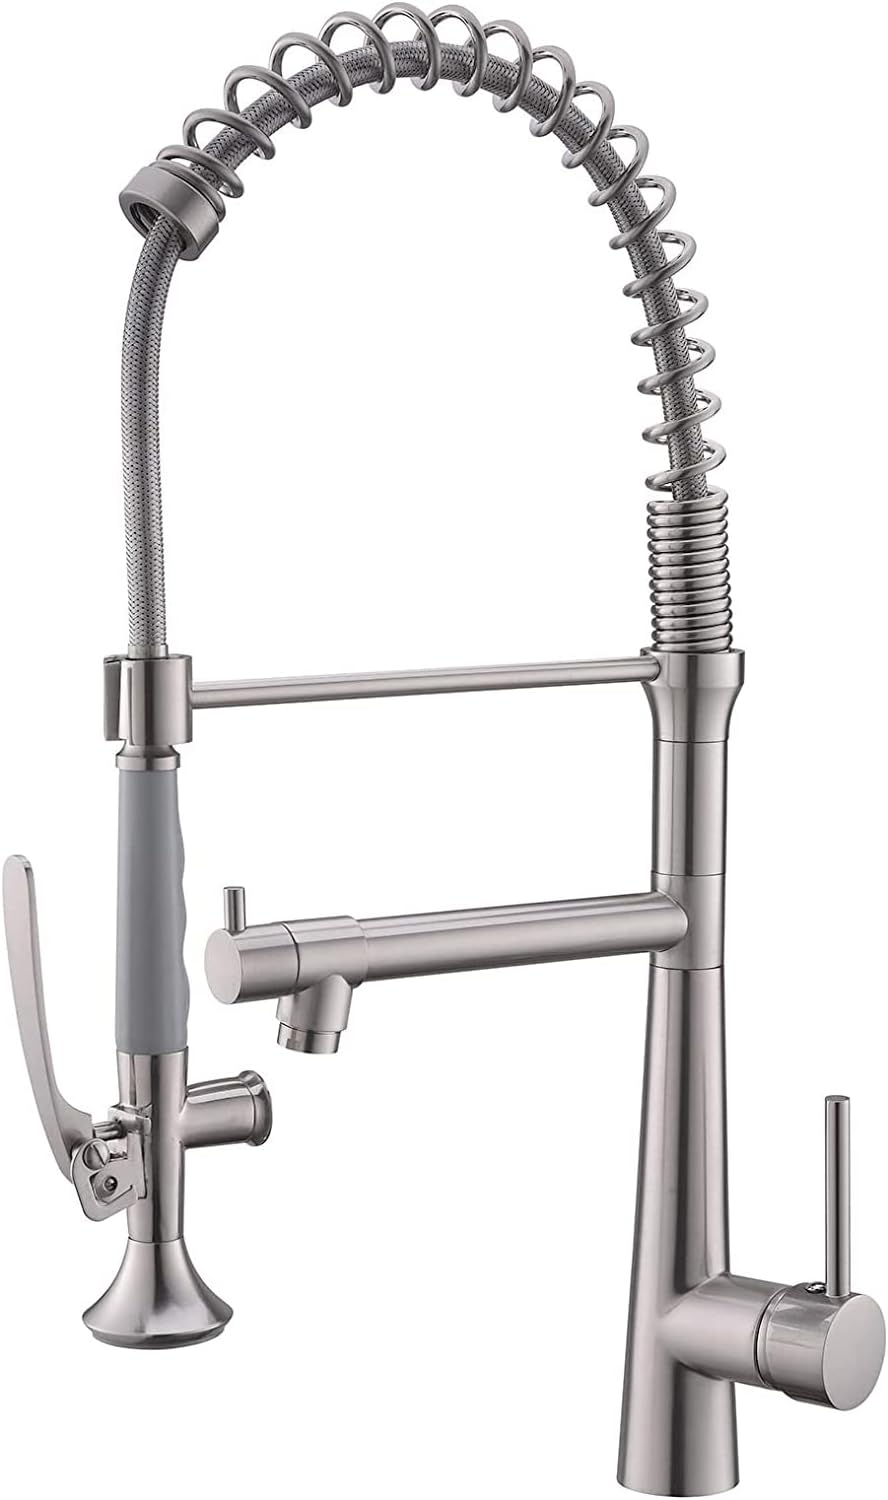 Kitchen Faucet with Pull Down Sprayer - AIMADI Commercial Stainless Steel Kitchen Sink Faucets with Sprayer,Brushed Nickel